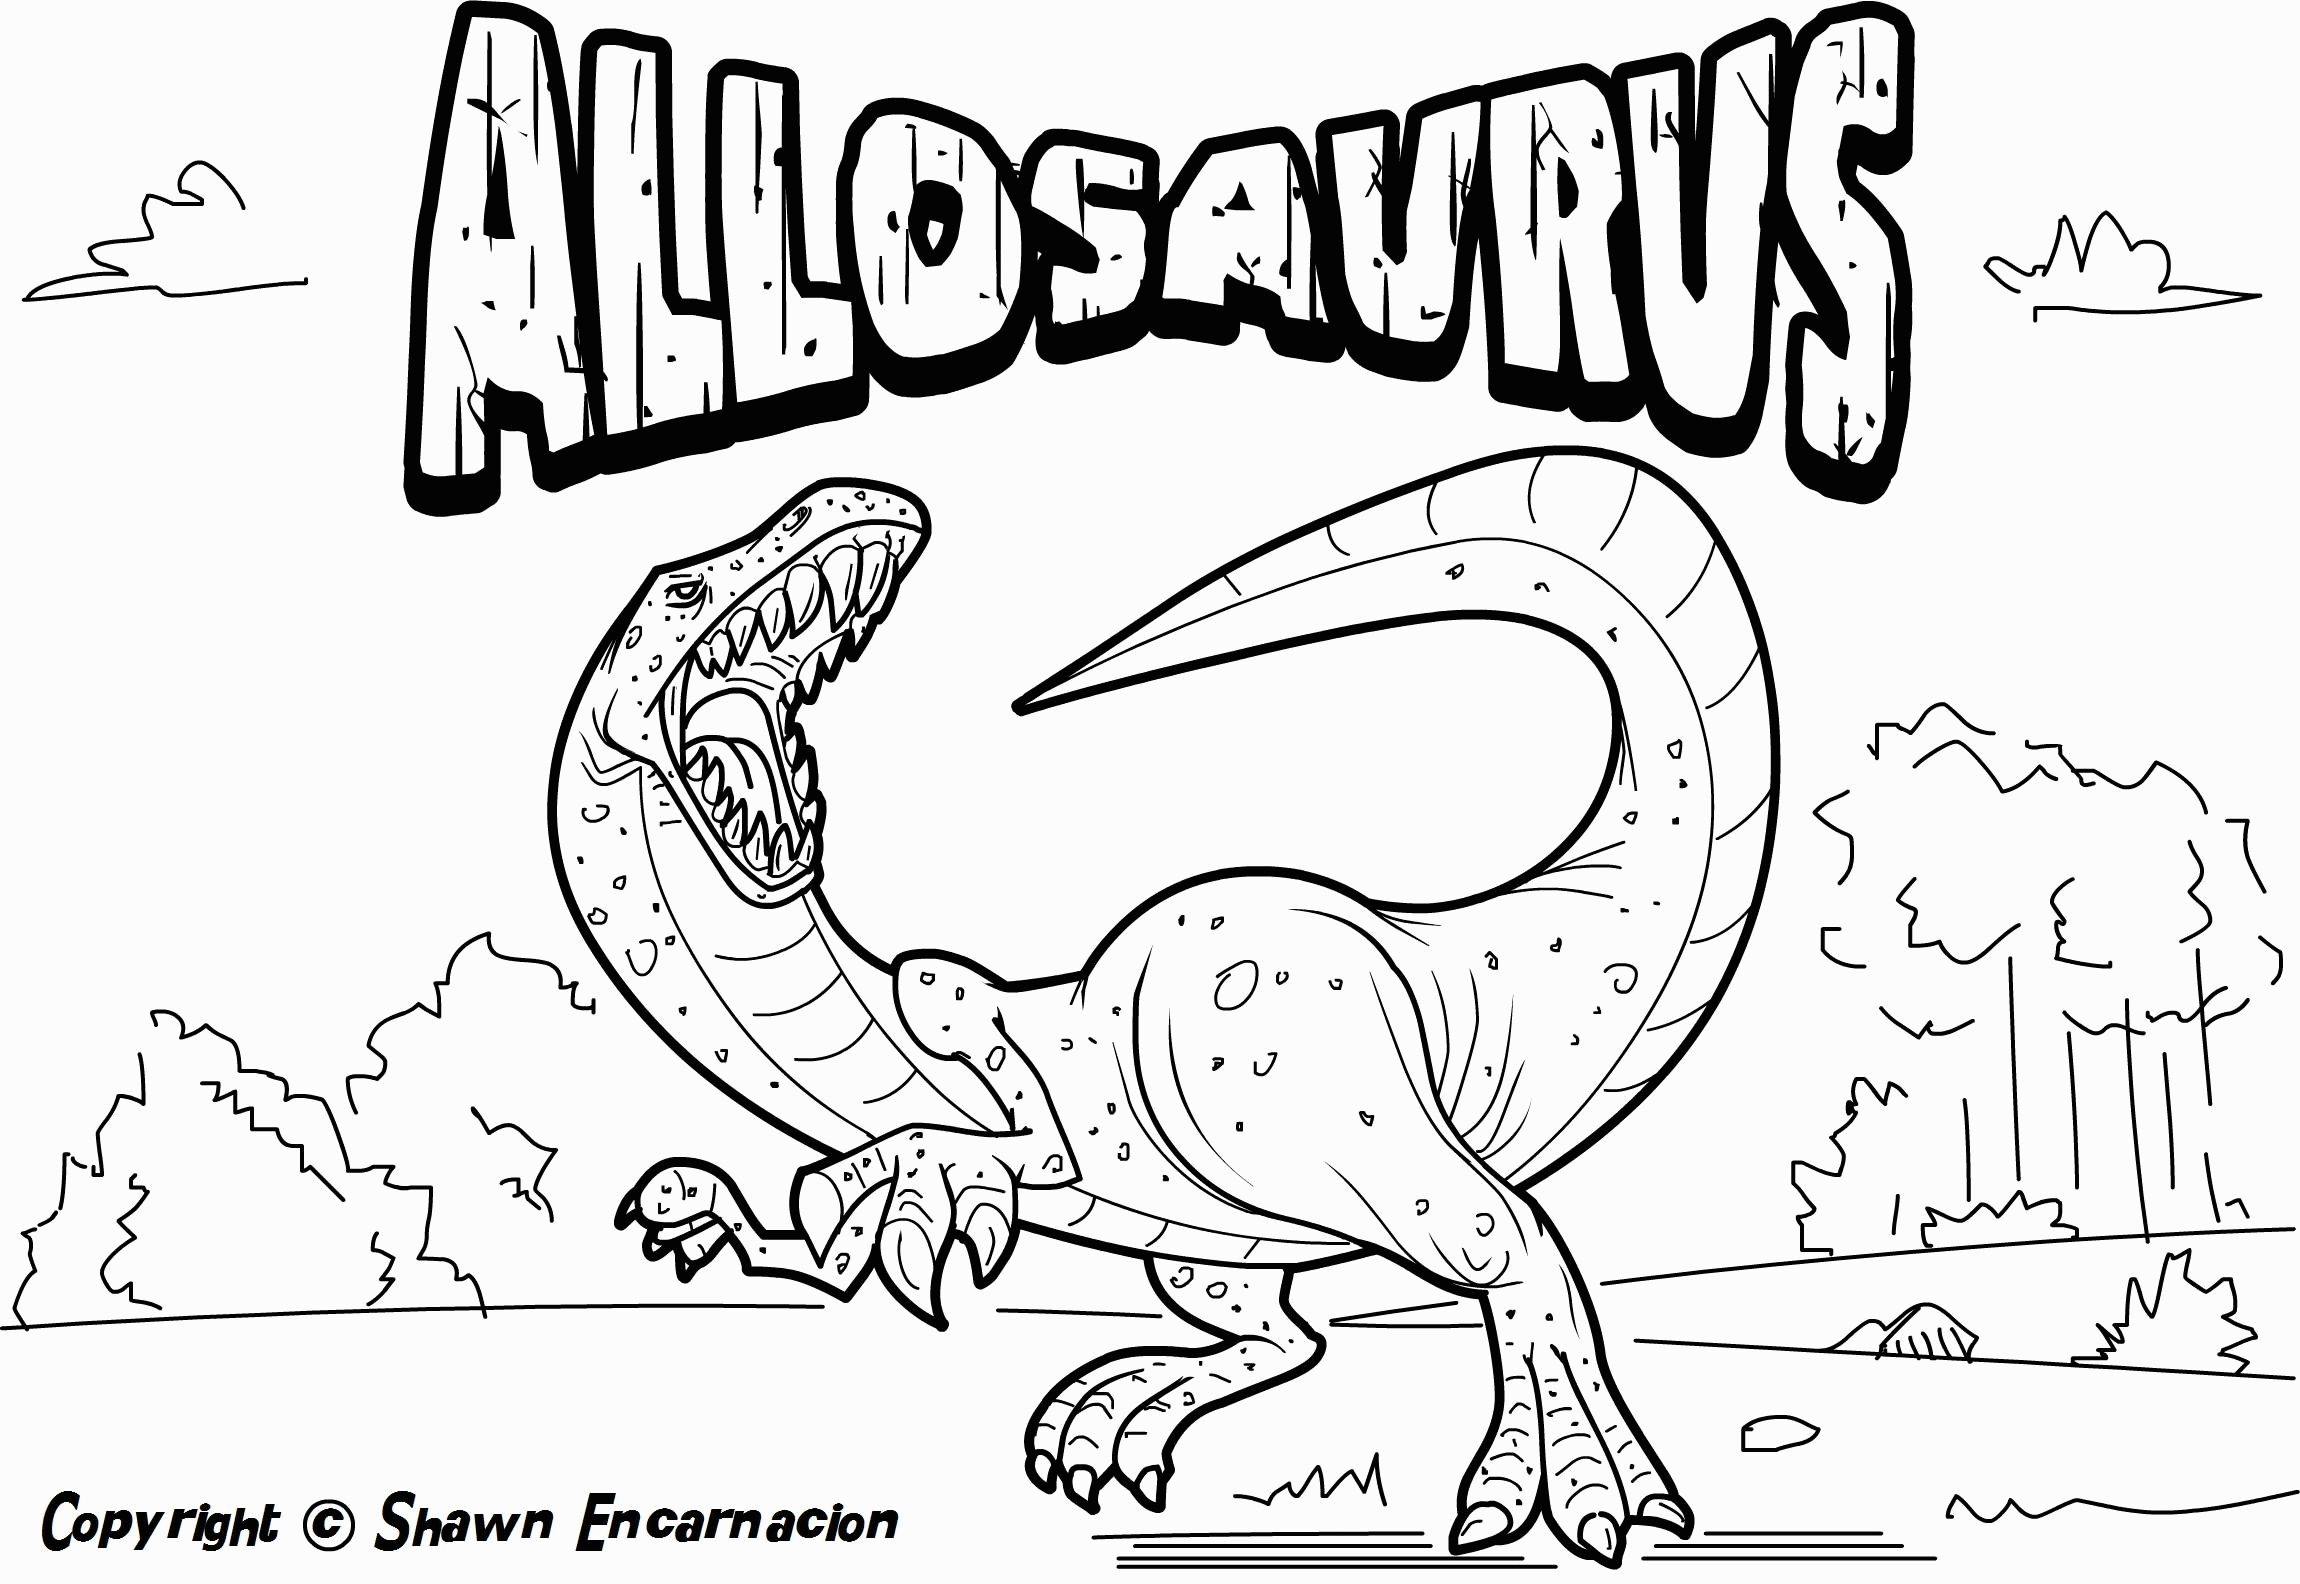 Gigantosaurus Disney Coloring Pages - Coloring Pages for Kids